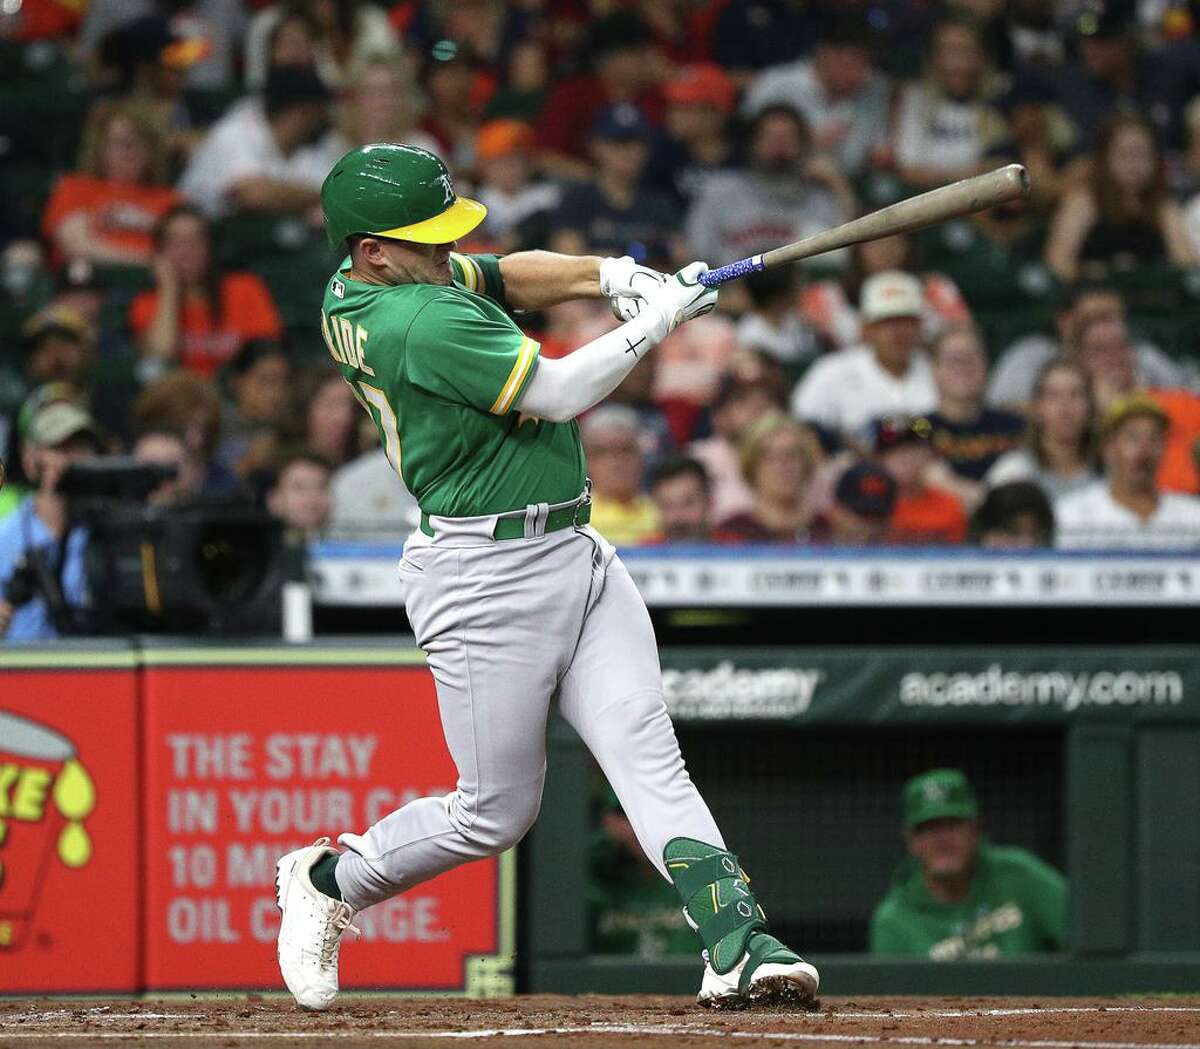 HOUSTON, TEXAS - AUGUST 12: Jonah Bride #77 of the Oakland Athletics doubles in a run in the second inning against the Houston Astros at Minute Maid Park on August 12, 2022 in Houston, Texas. (Photo by Bob Levey/Getty Images)